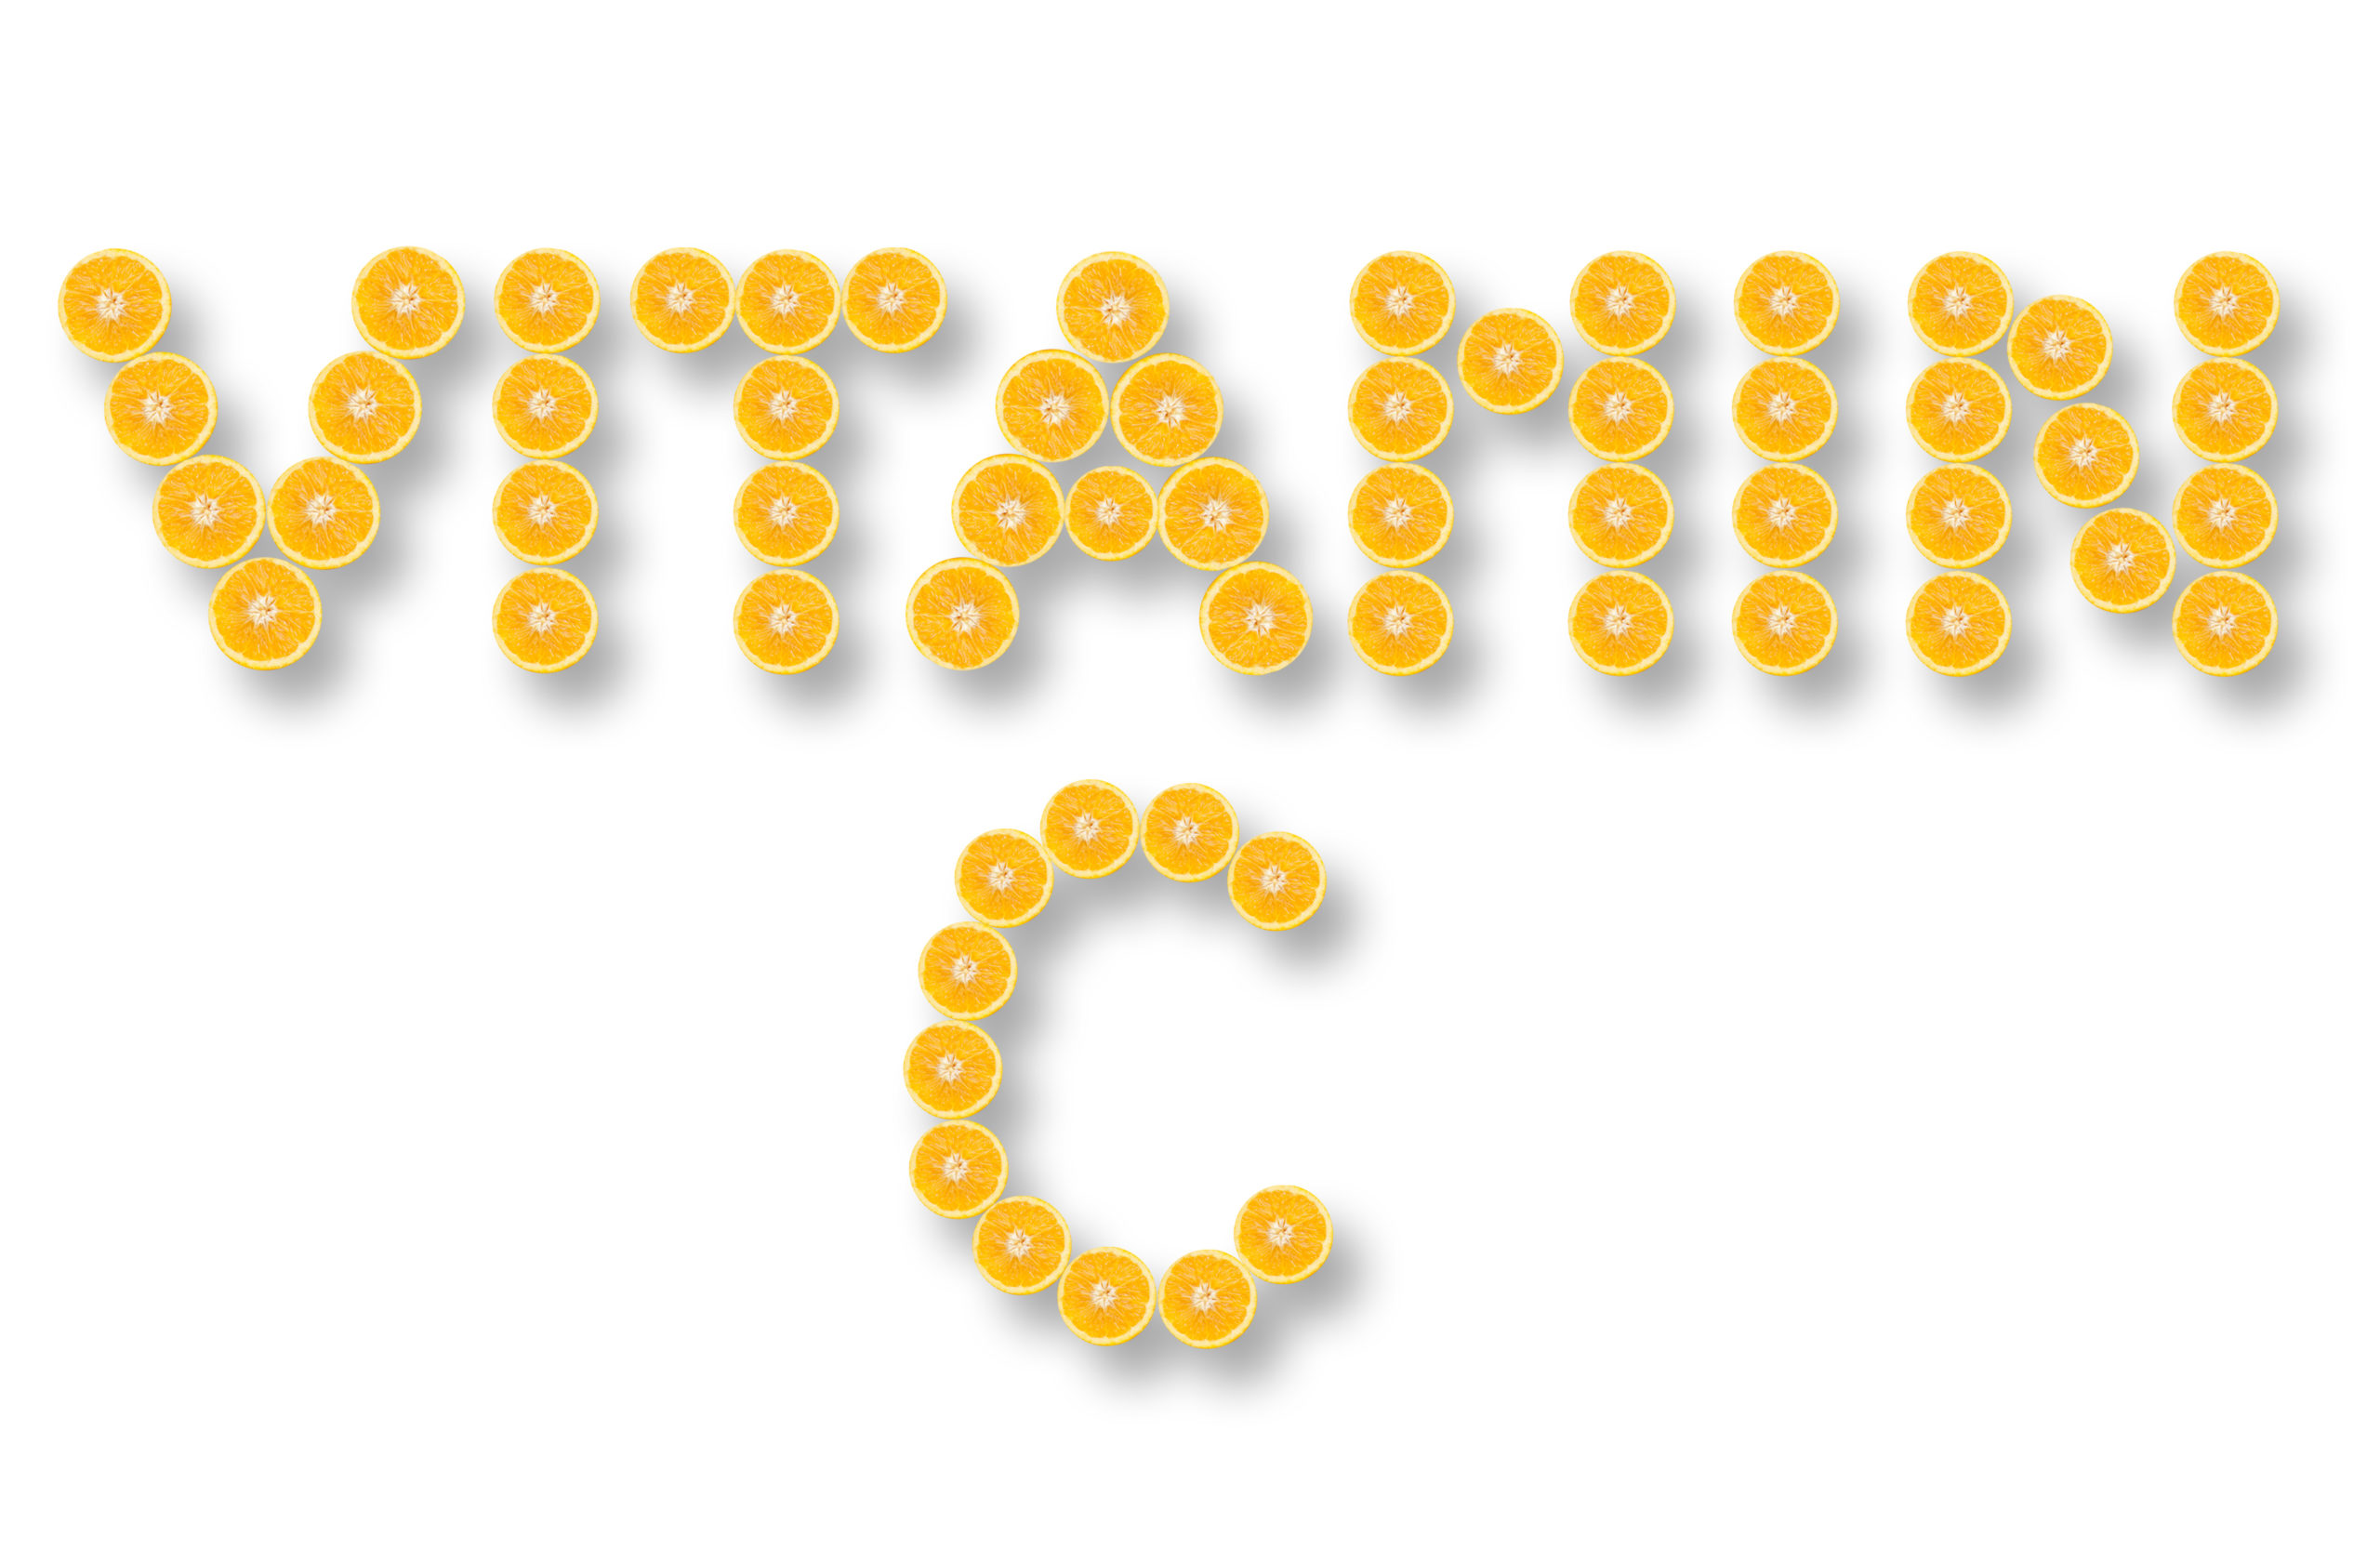 Vitamin C spelled out using oranges